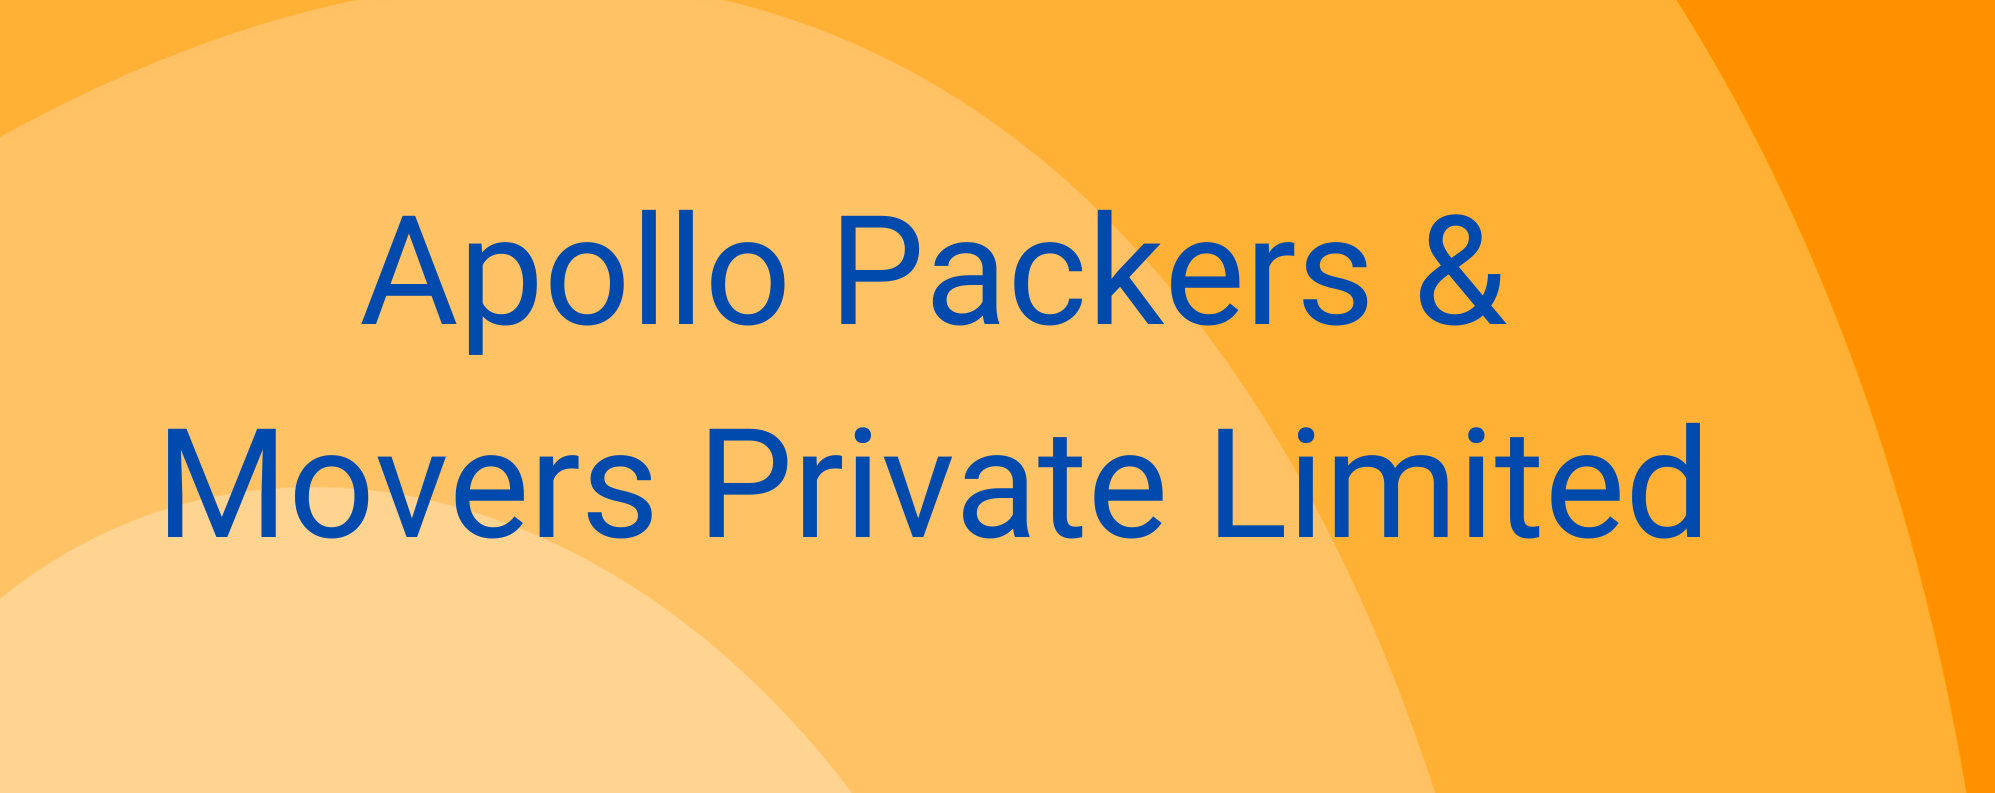  Apollo Packers & Movers Private Limited